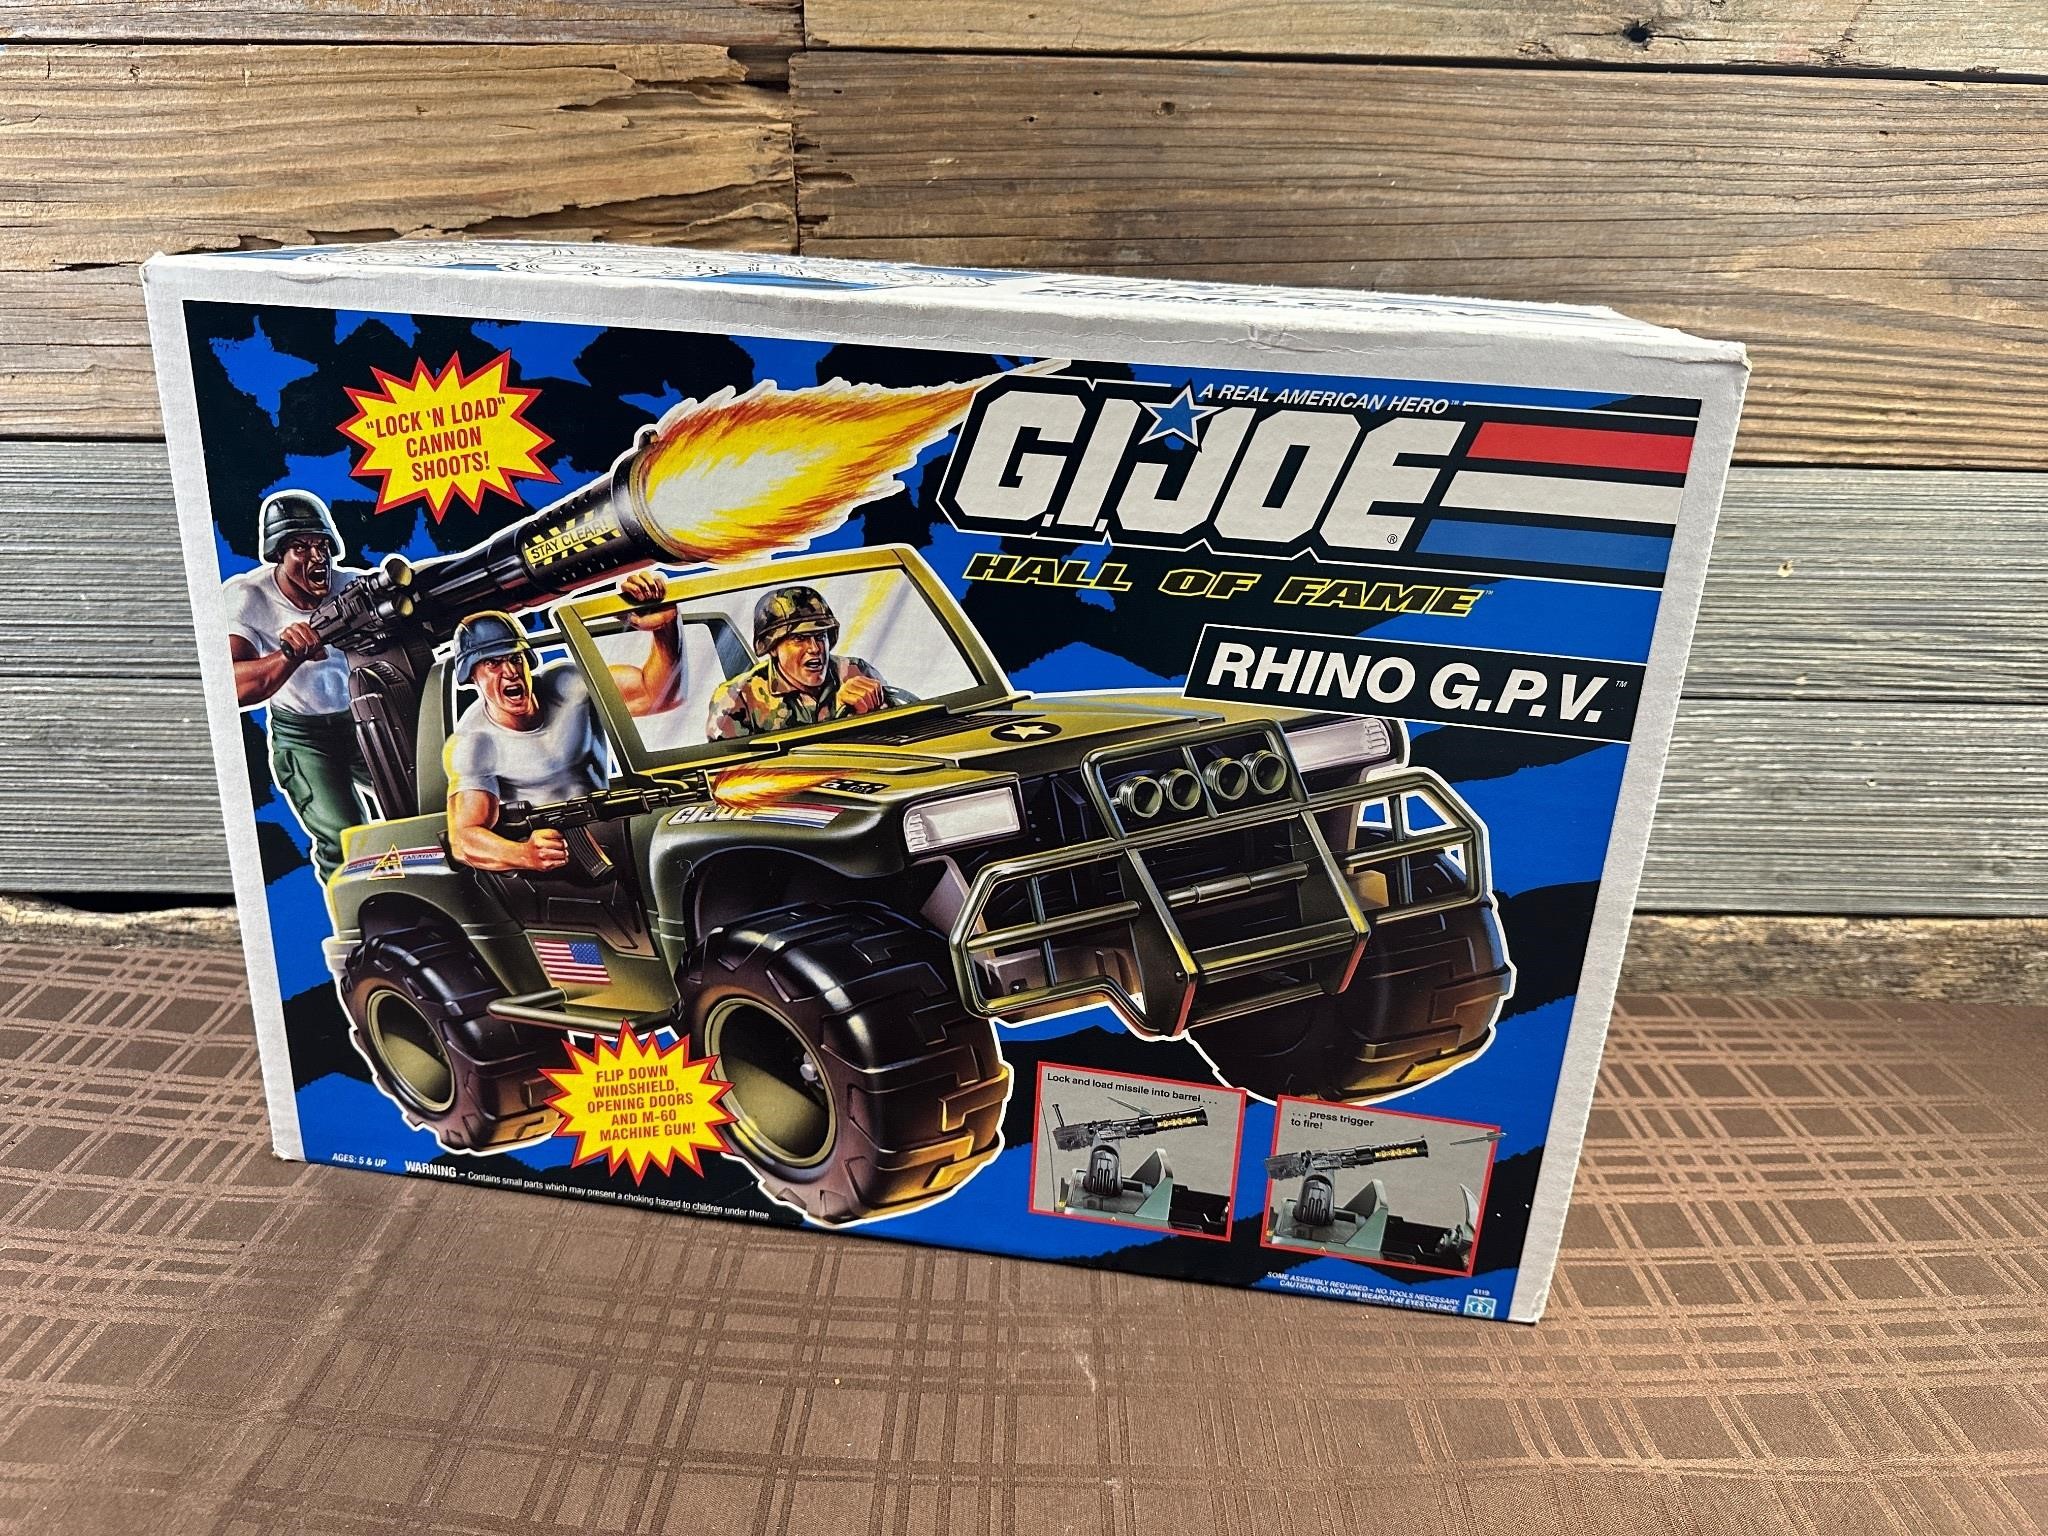 June 8th Toys, Antiques & Collectibles - GI Joe Collection